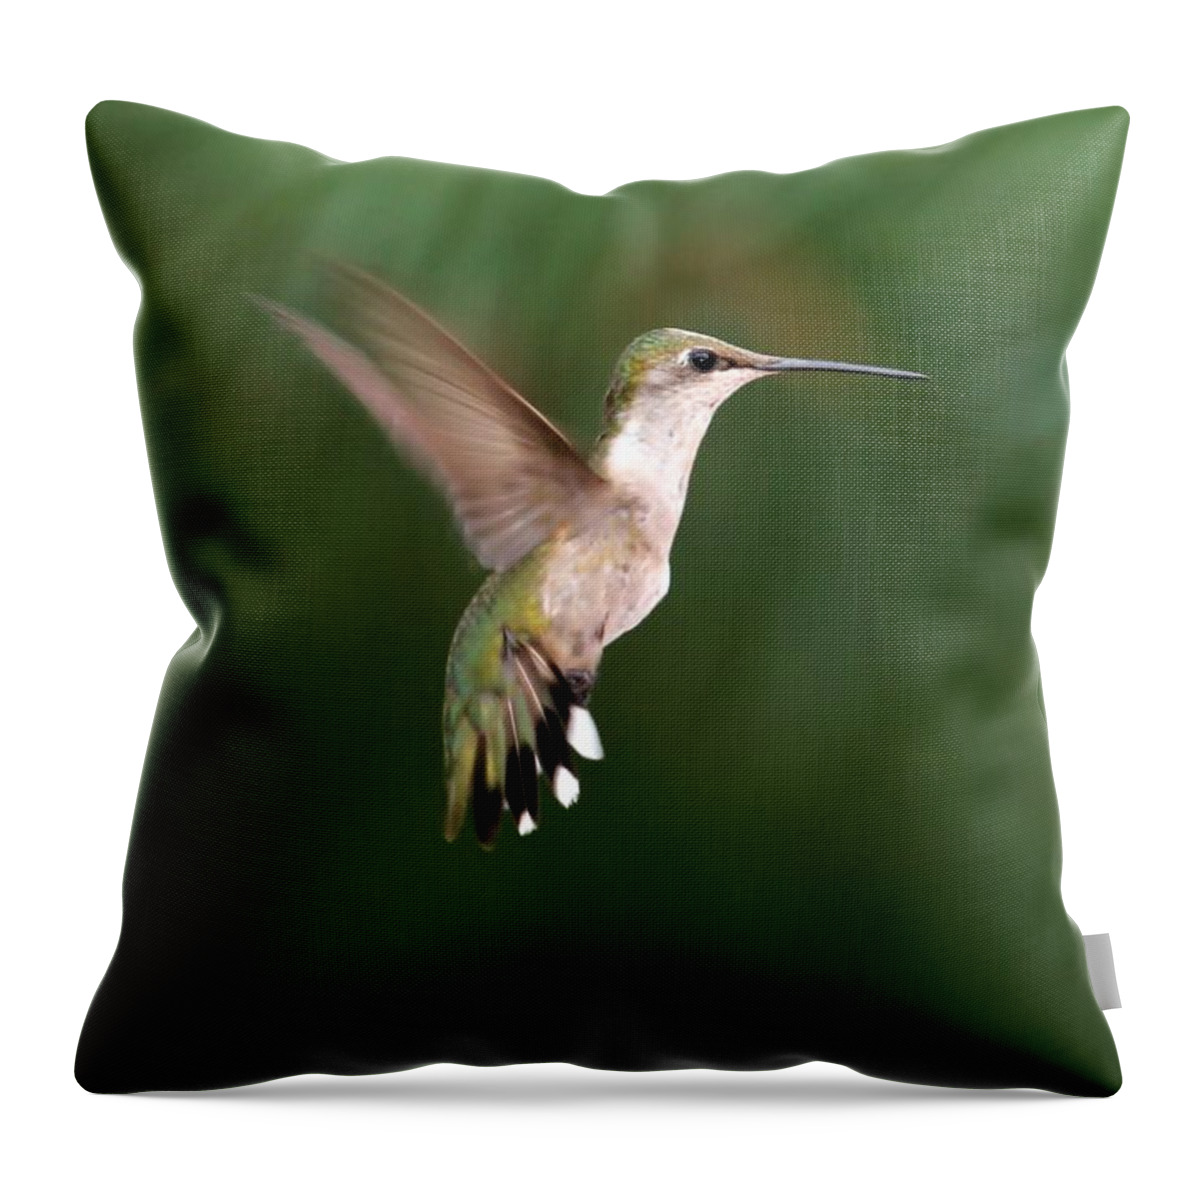 Hummer Throw Pillow featuring the photograph Awesome Hummingbird by Sabrina L Ryan